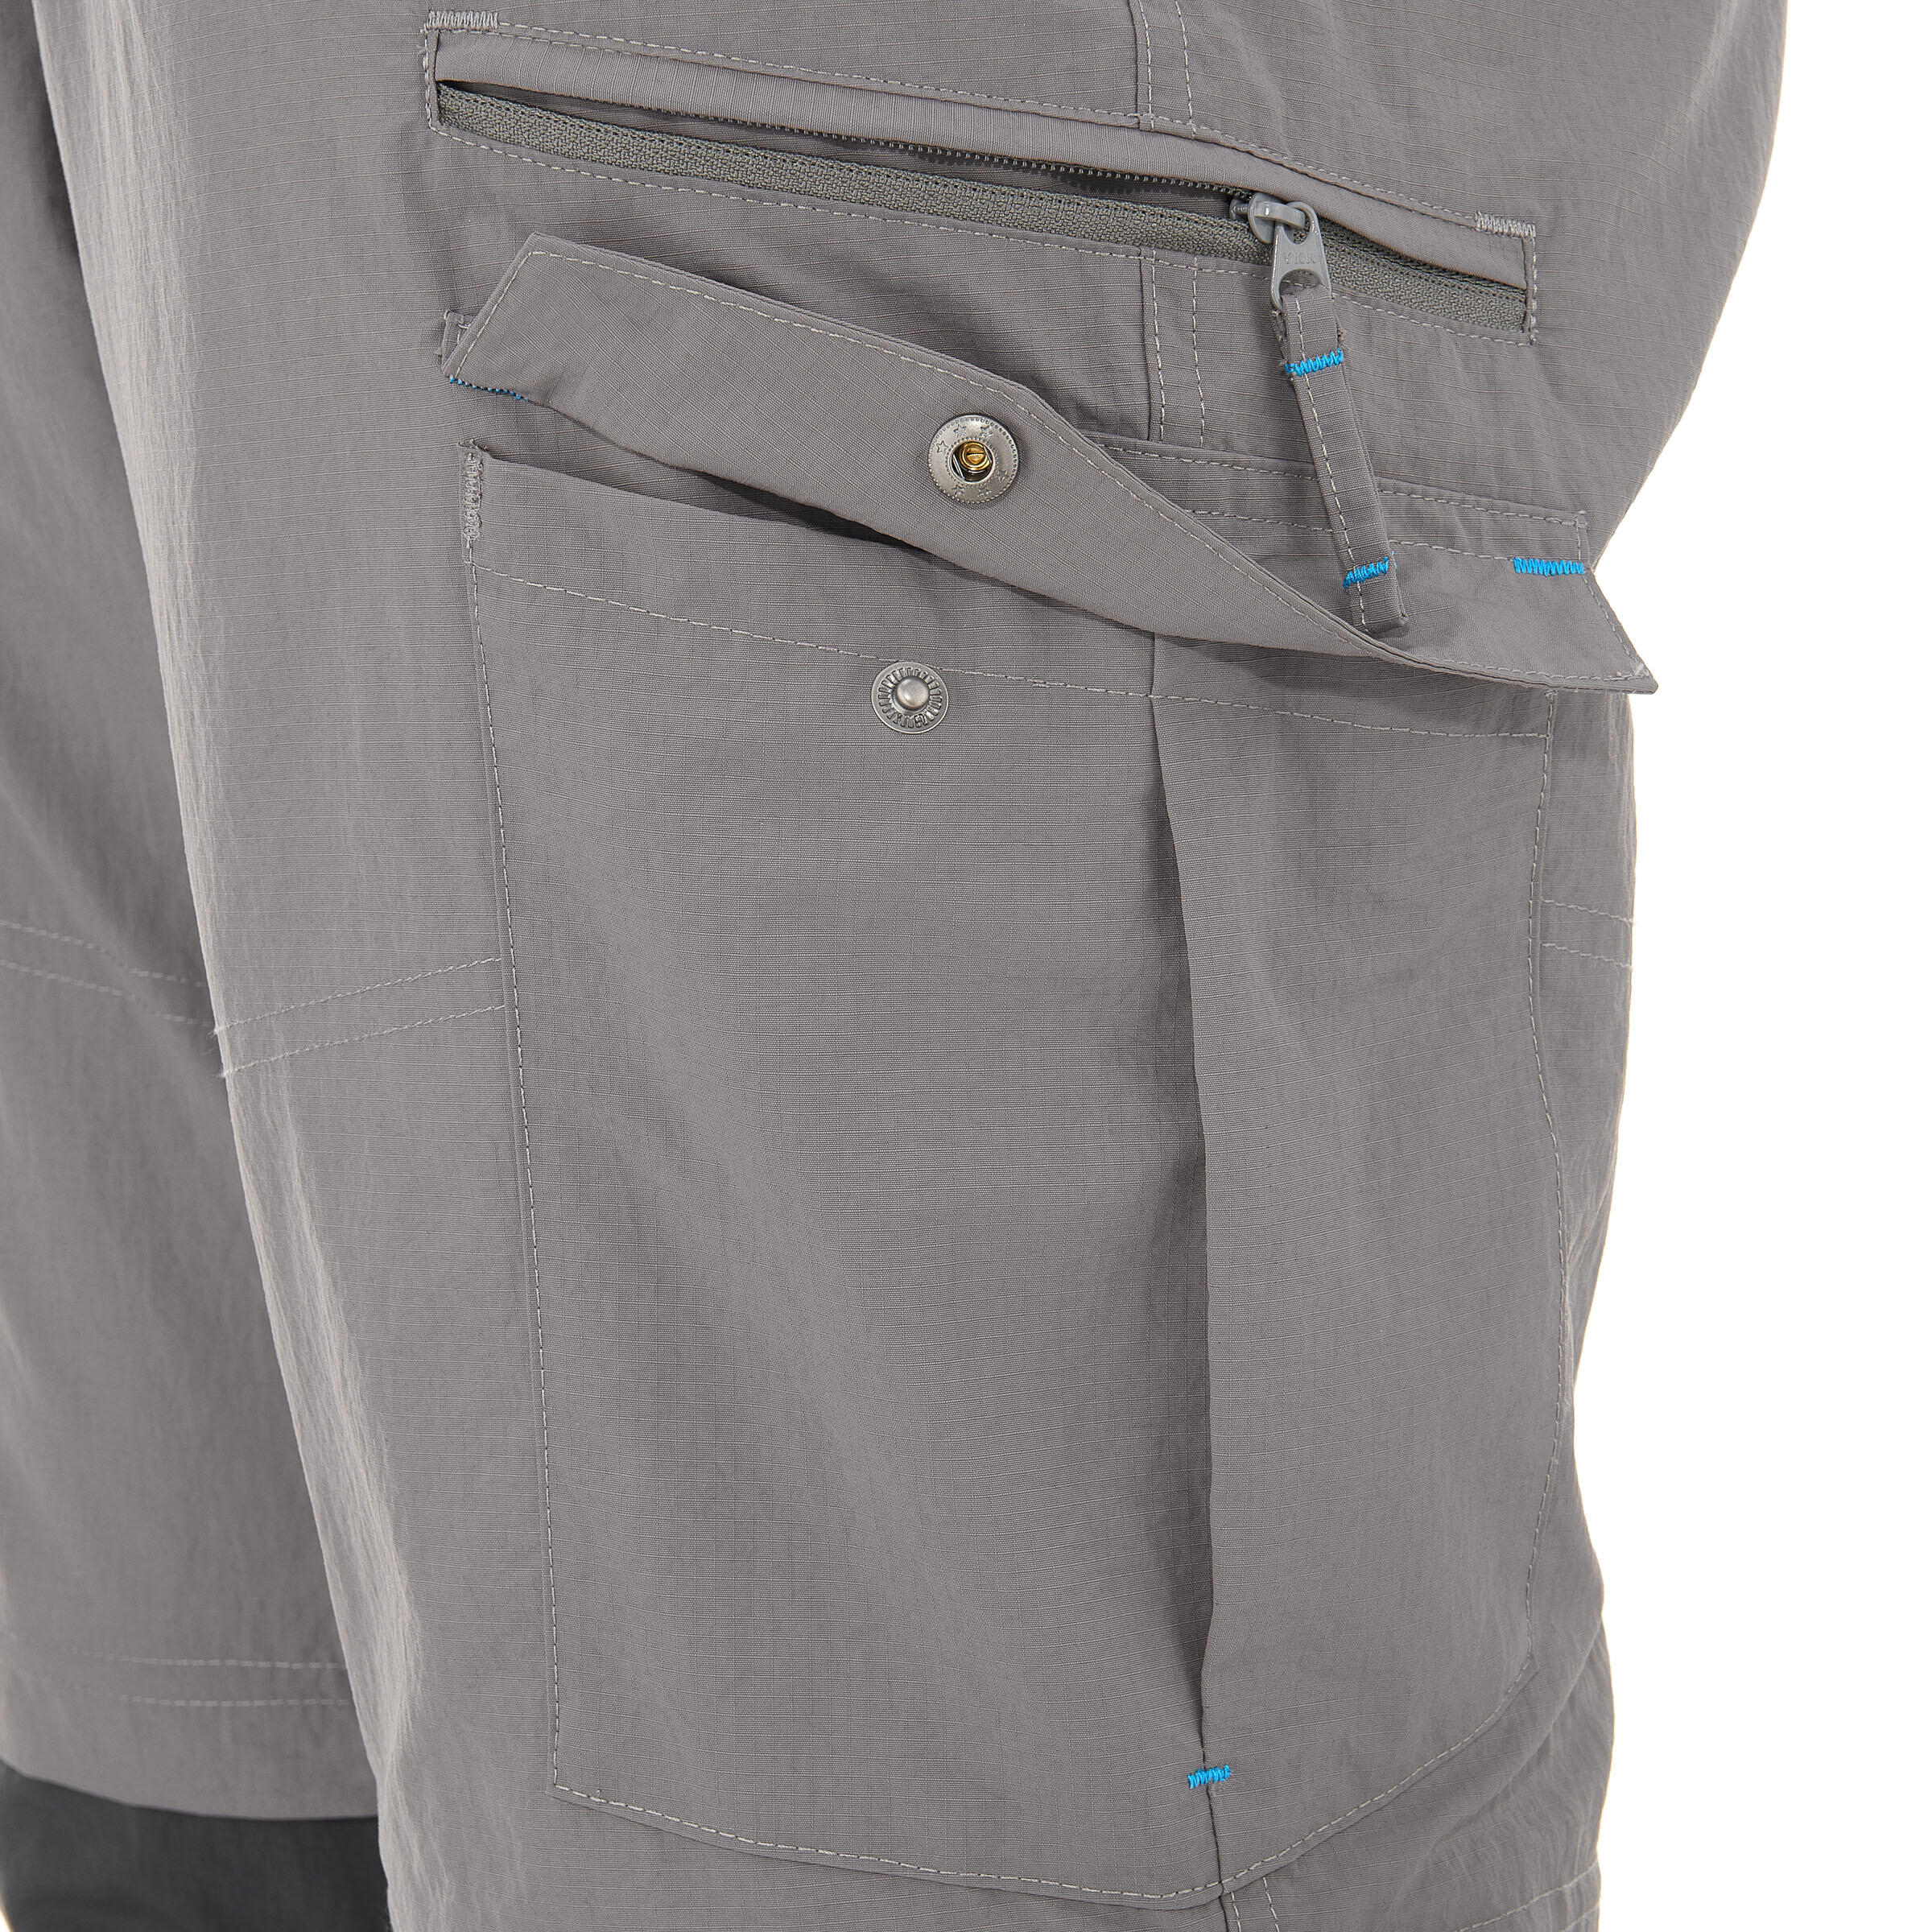 Forclaz 100 convertible hiking trousers - Light Grey 15/19